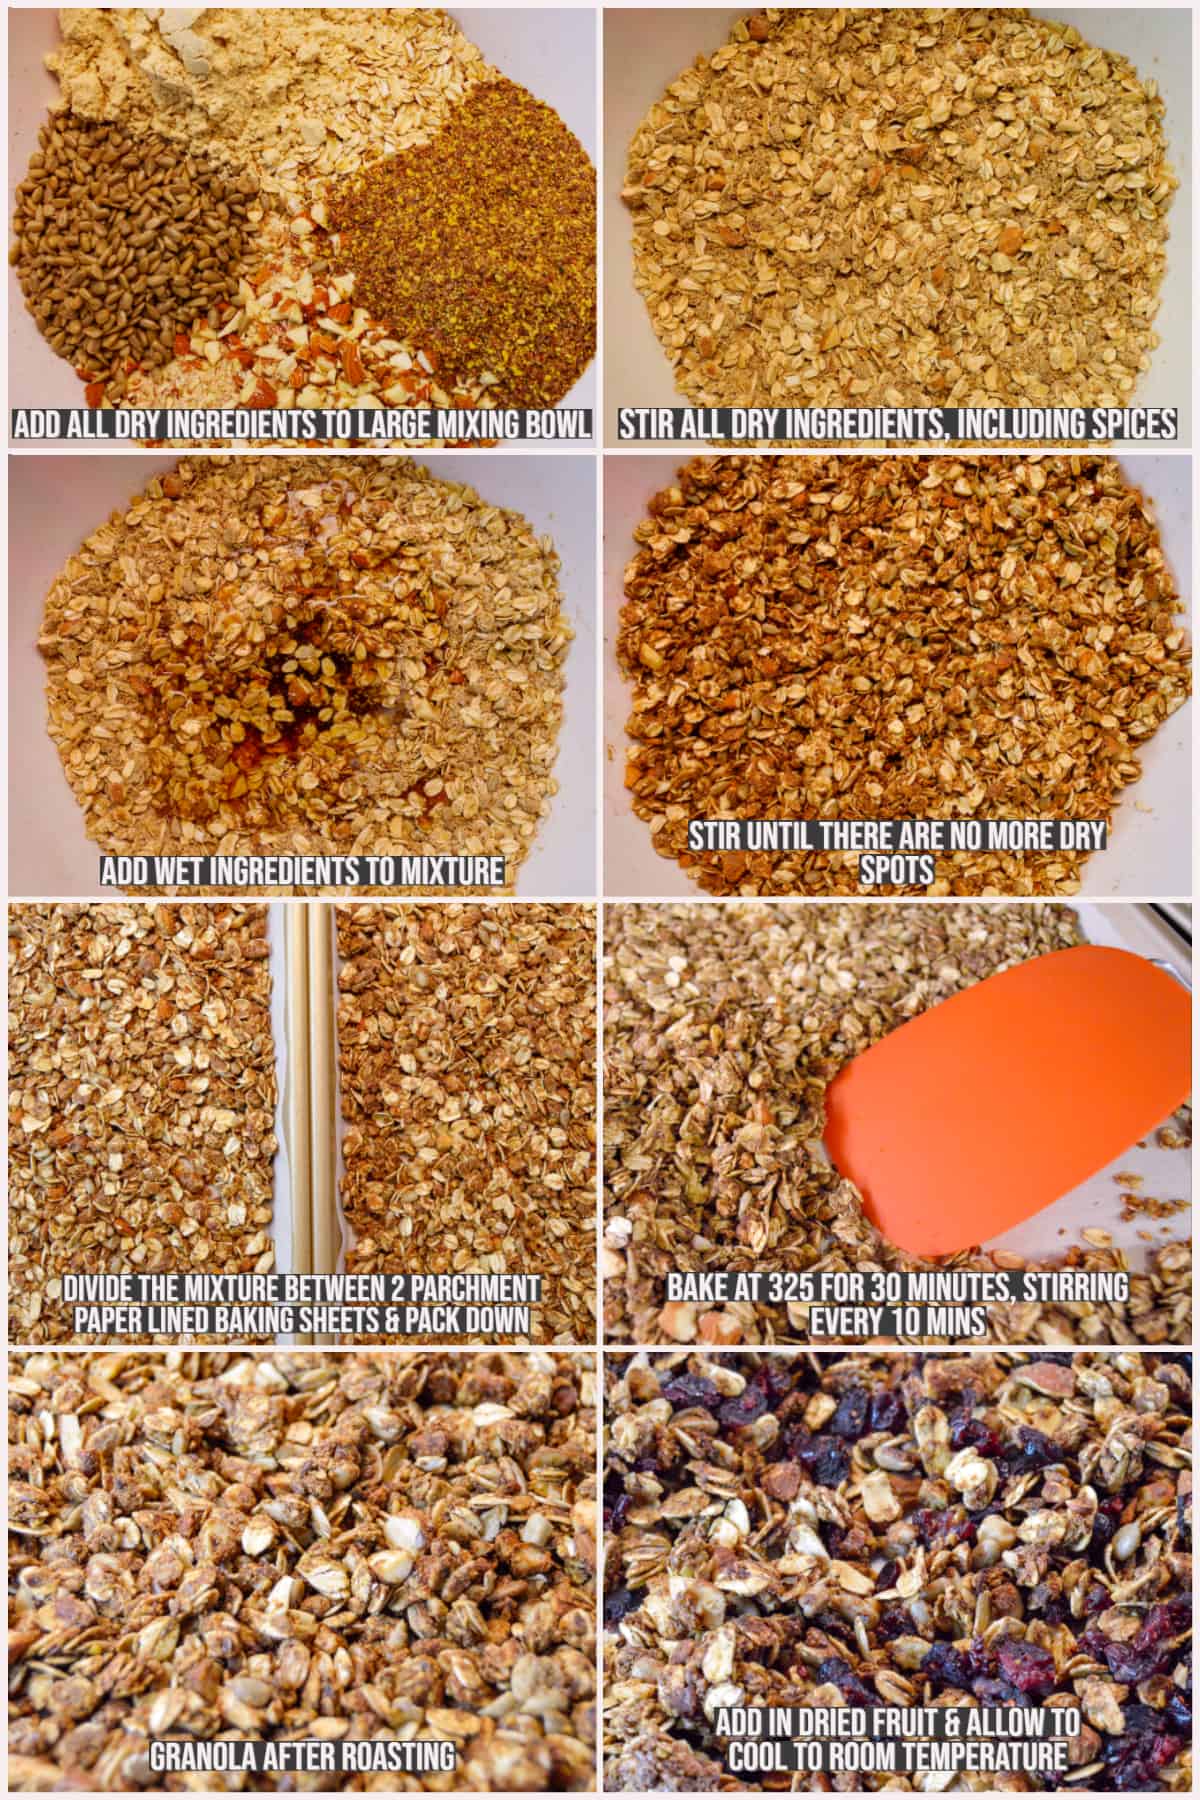 8 collage pictures shown for steps to make homemade granola